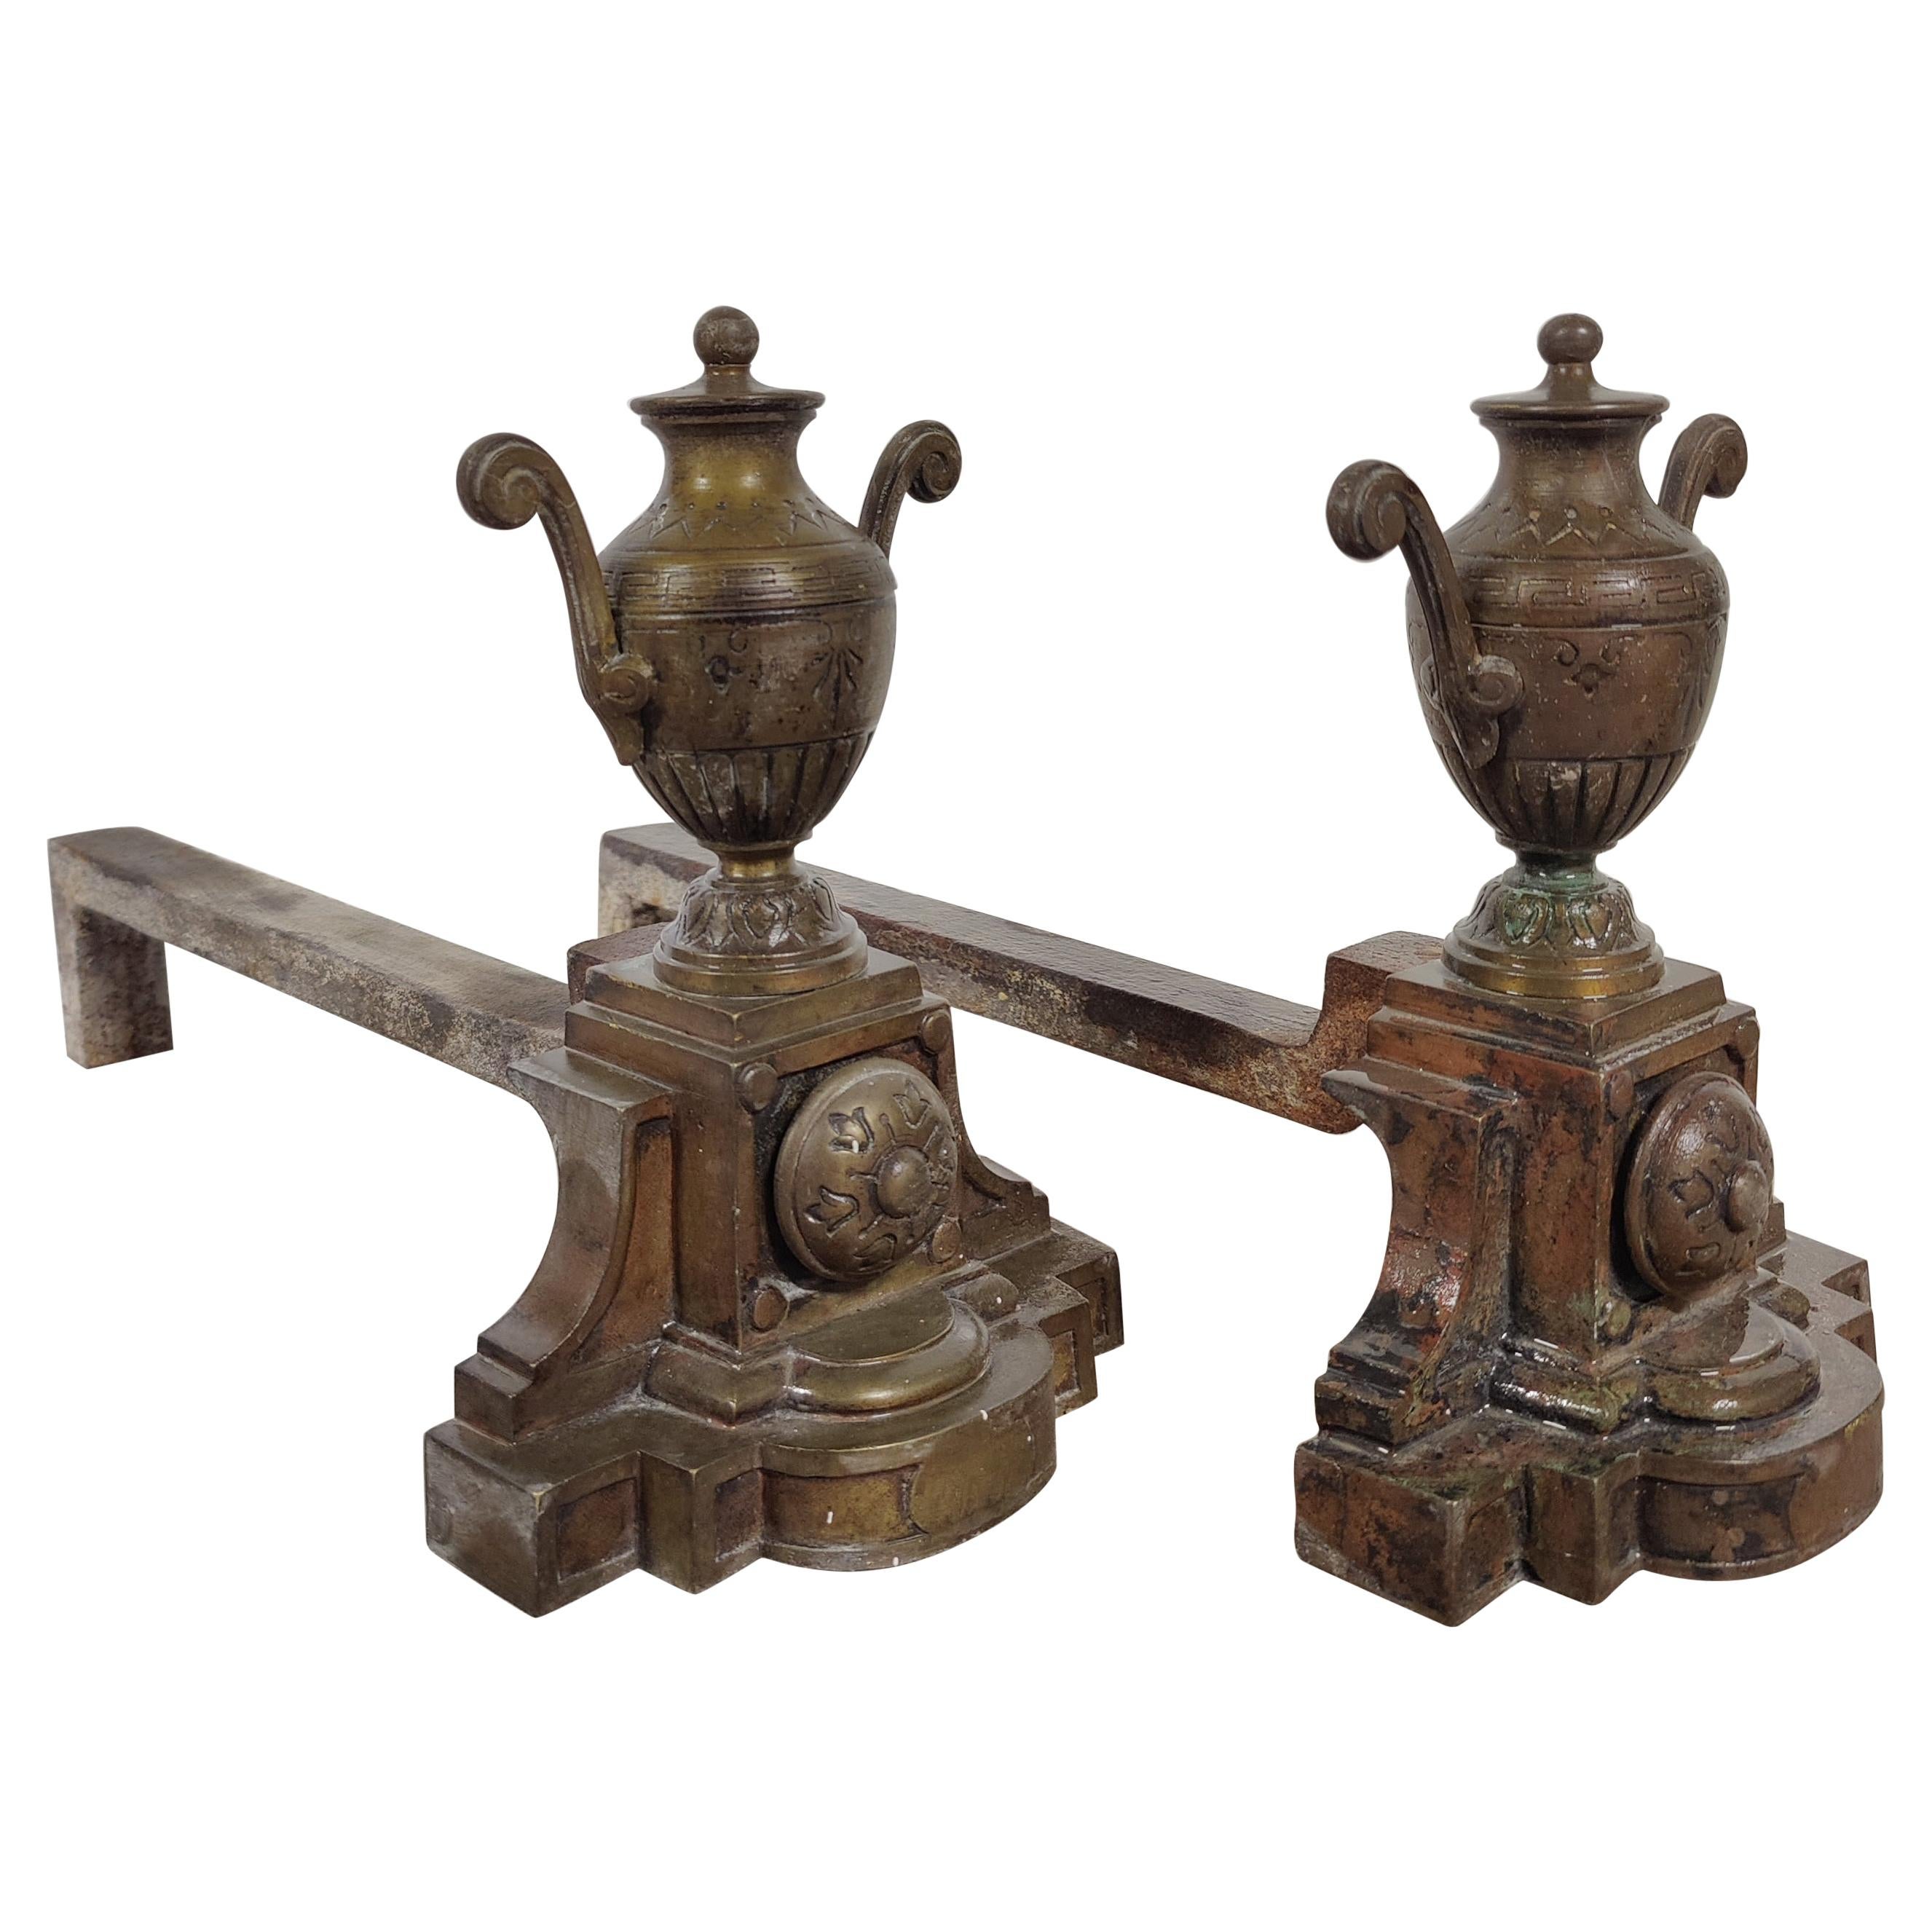 Antique Andirons / Fire Dogs with Copper Urns